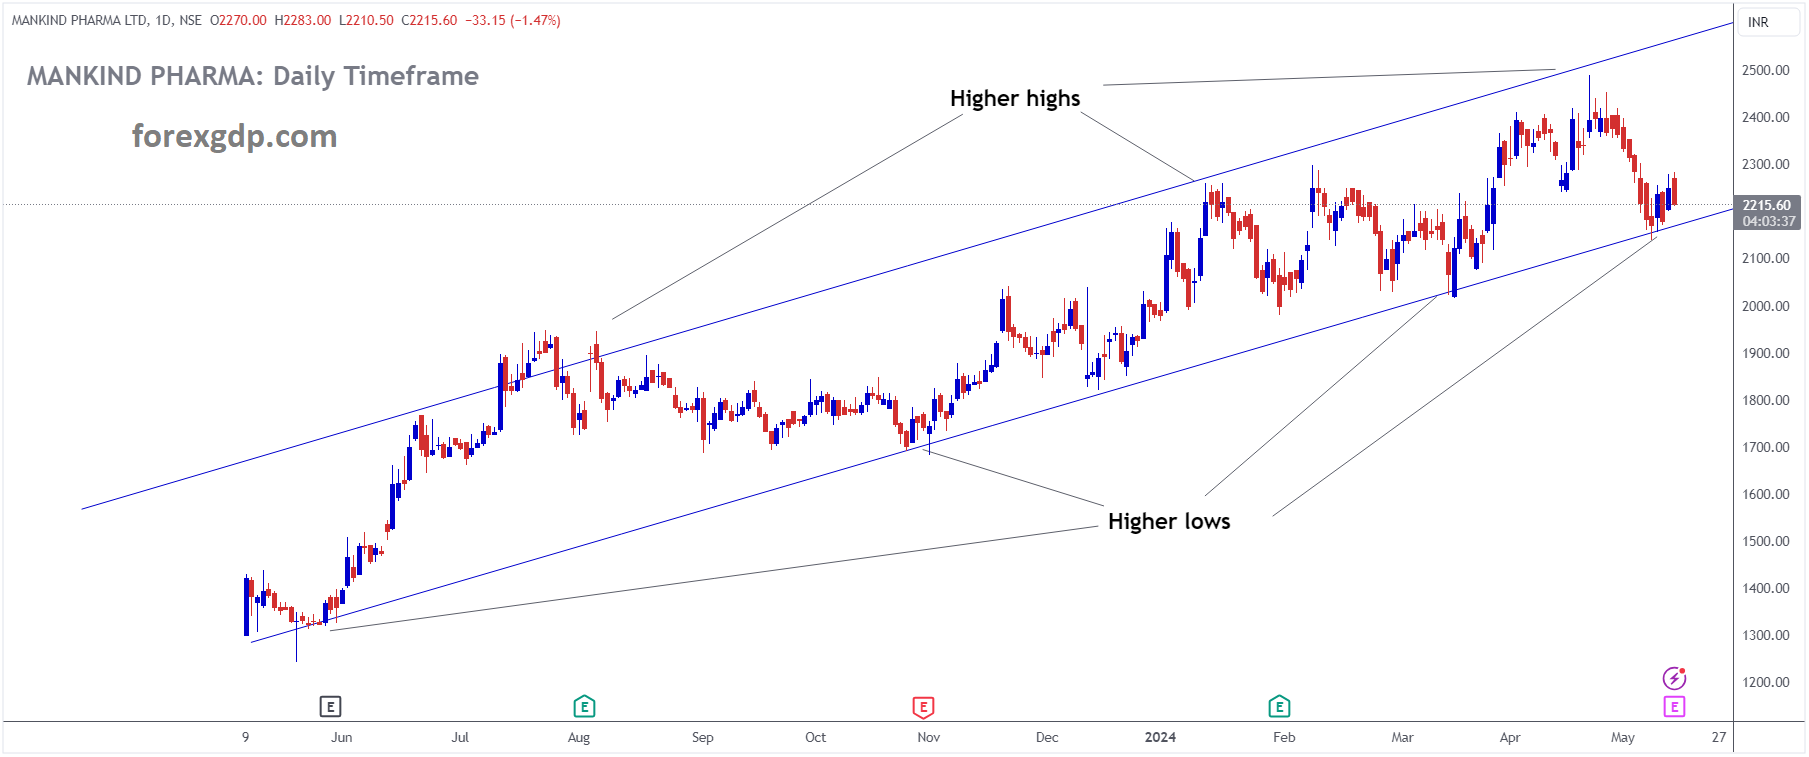 MANKIND PHARMA LTD Market price is moving in Ascending channel and market has reached higher low area of the channel